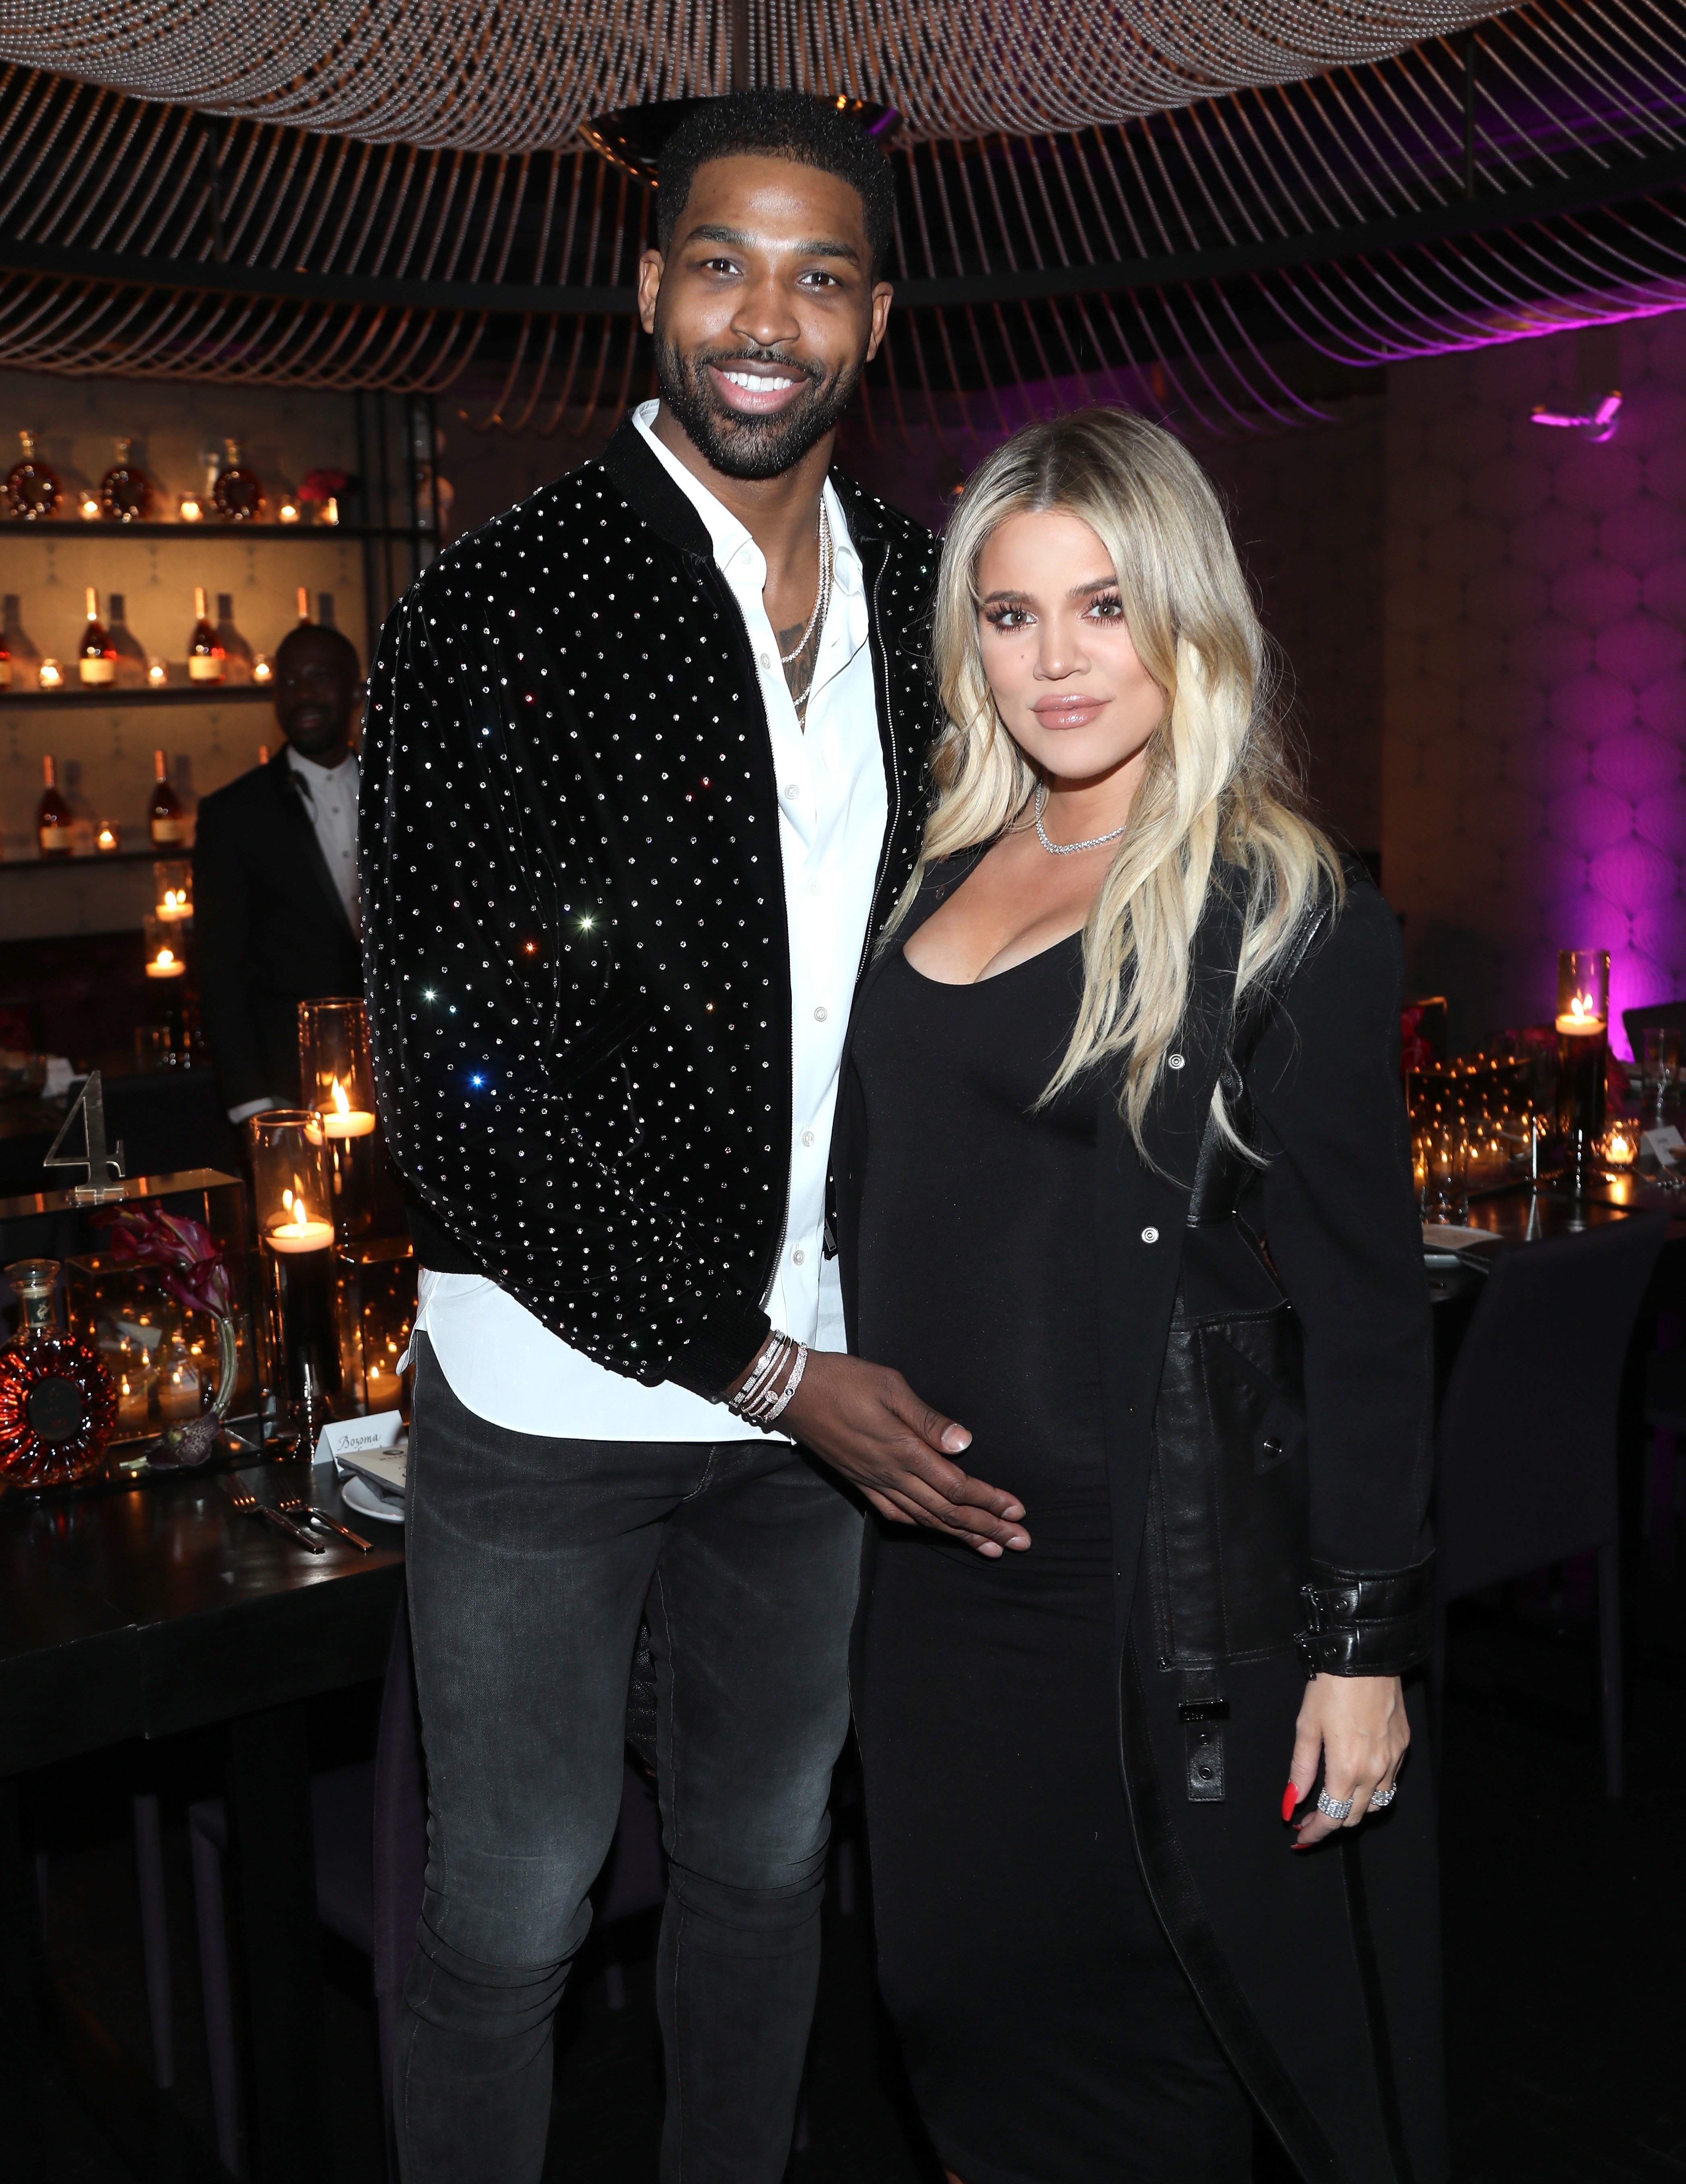 Tristan and his ex Khloe Kardashian have two children together, True and Tatum